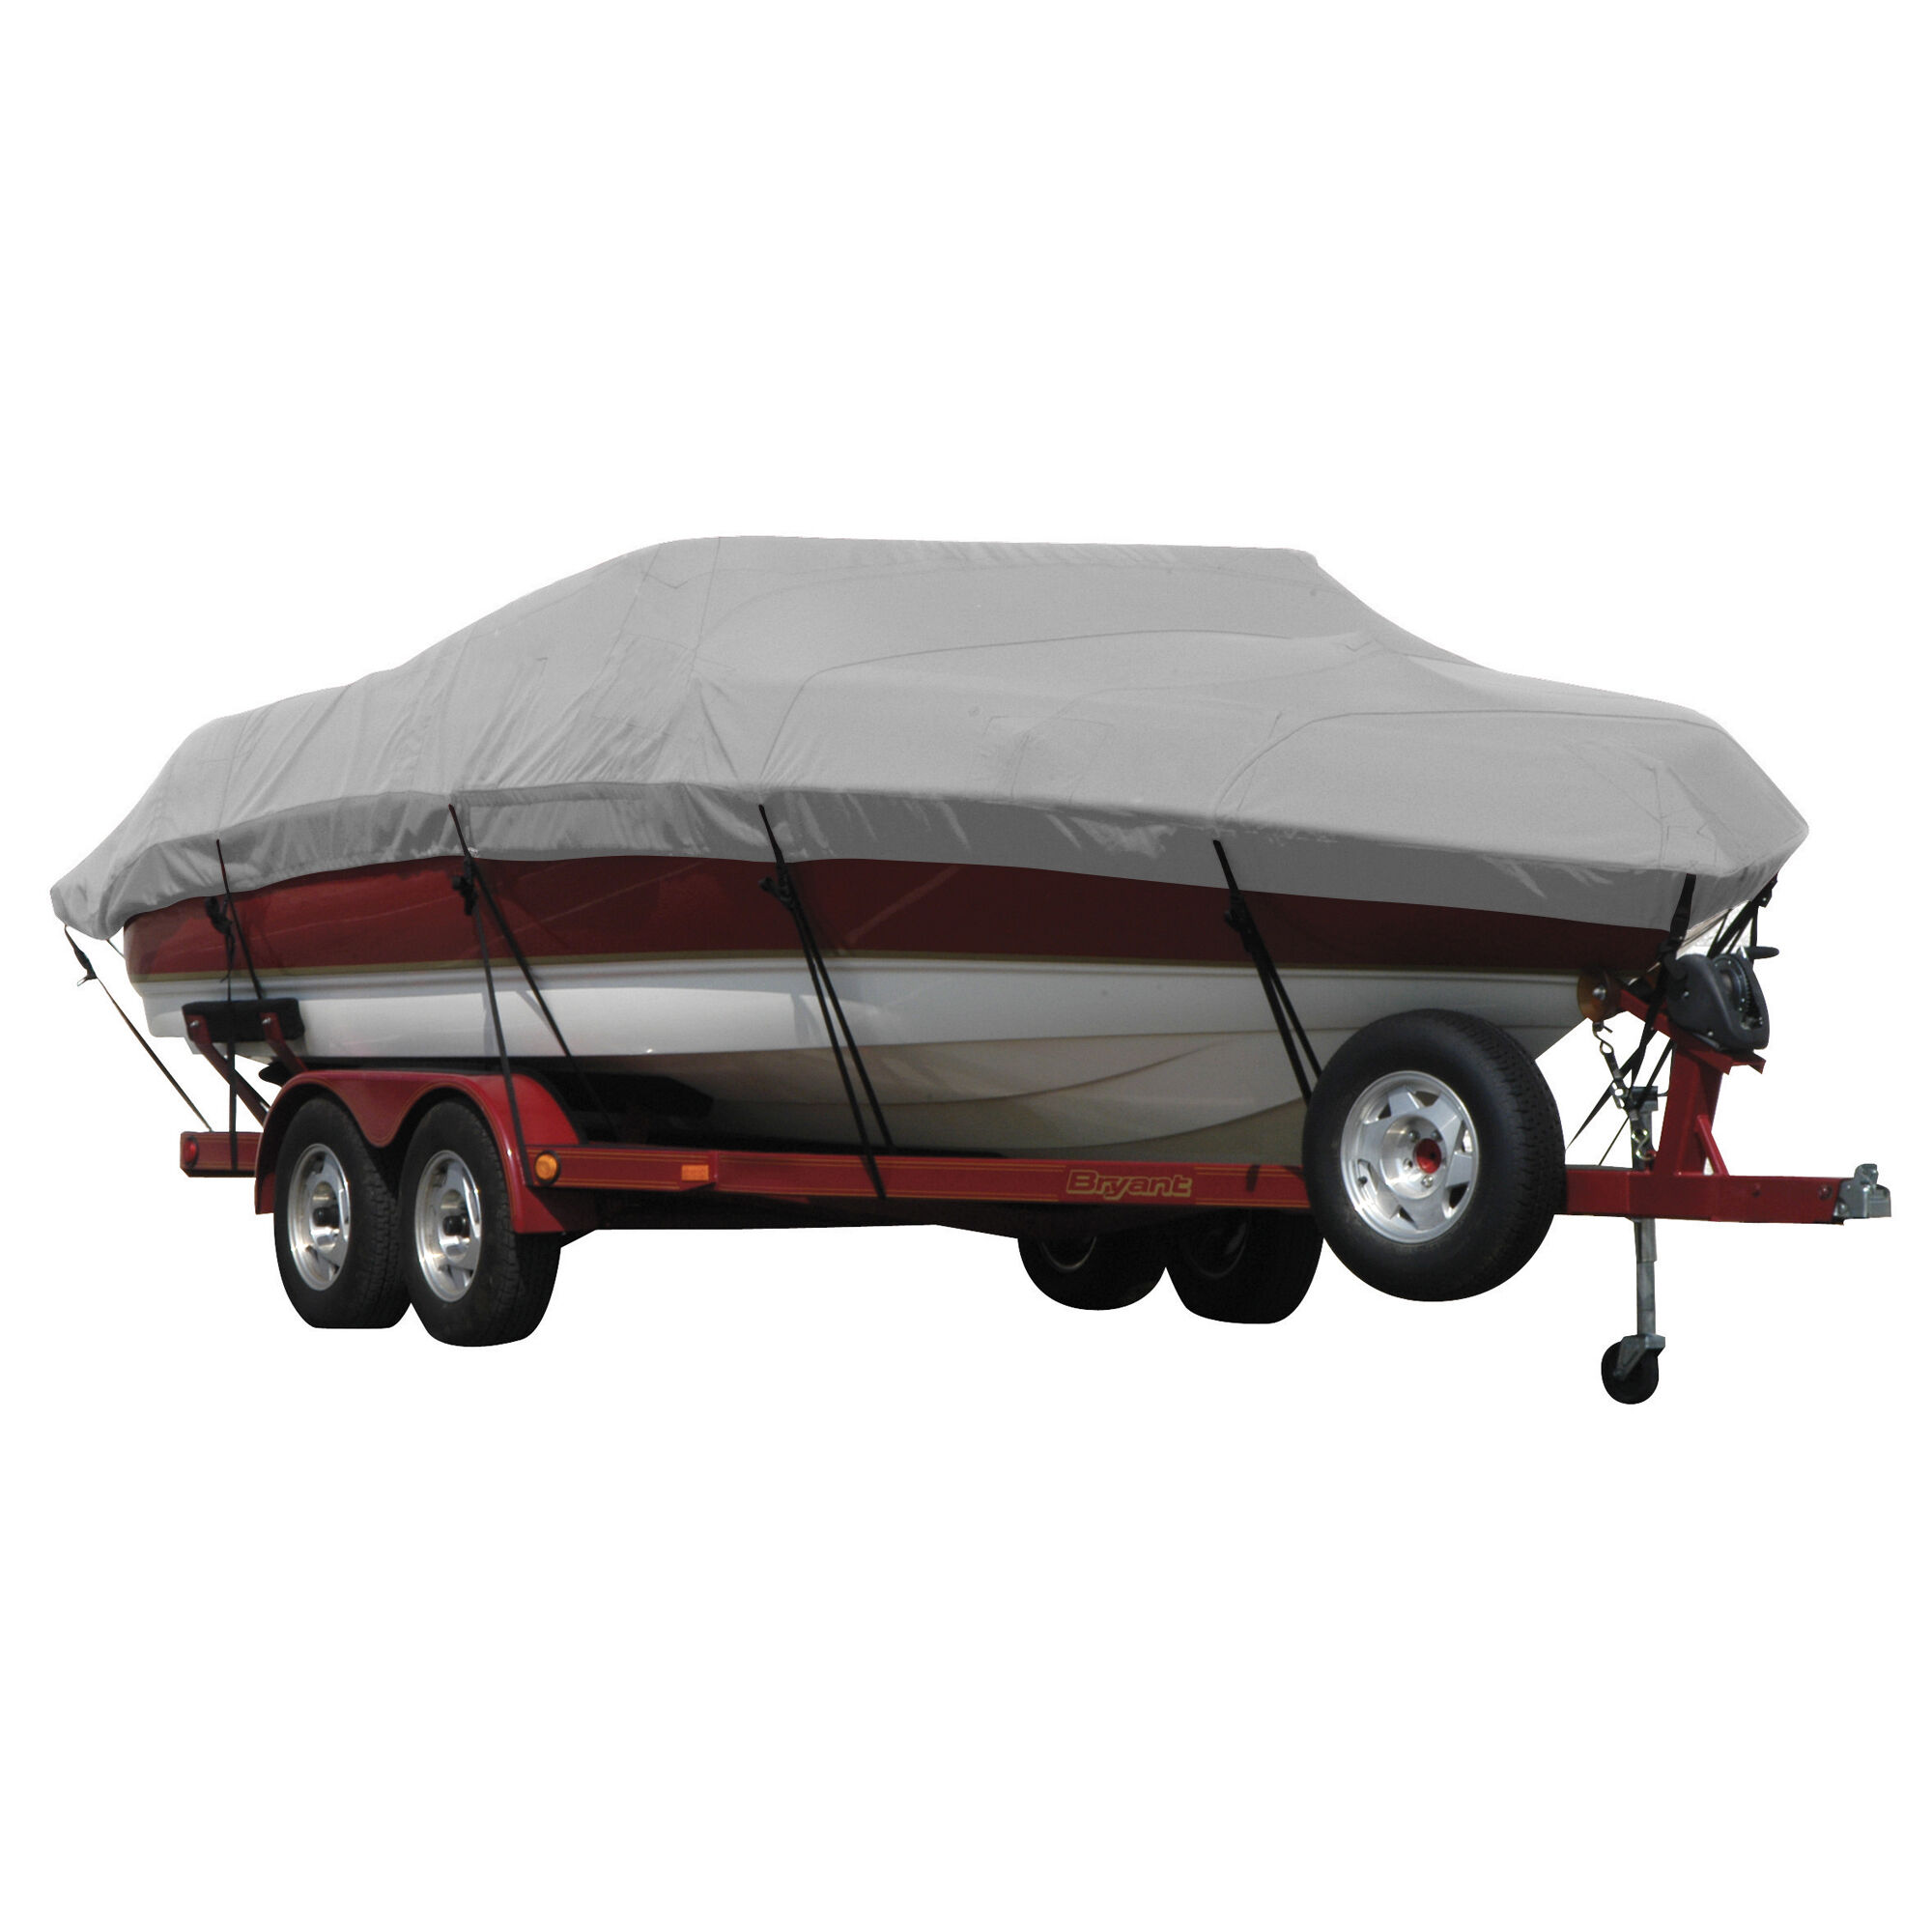 Covermate Exact Fit Sunbrella Boat Cover for Tahoe 222 222 Deck Boat Bimini Laid Aft Doesn't Cover Ski Tow Bar I/O. Grey Acrylic